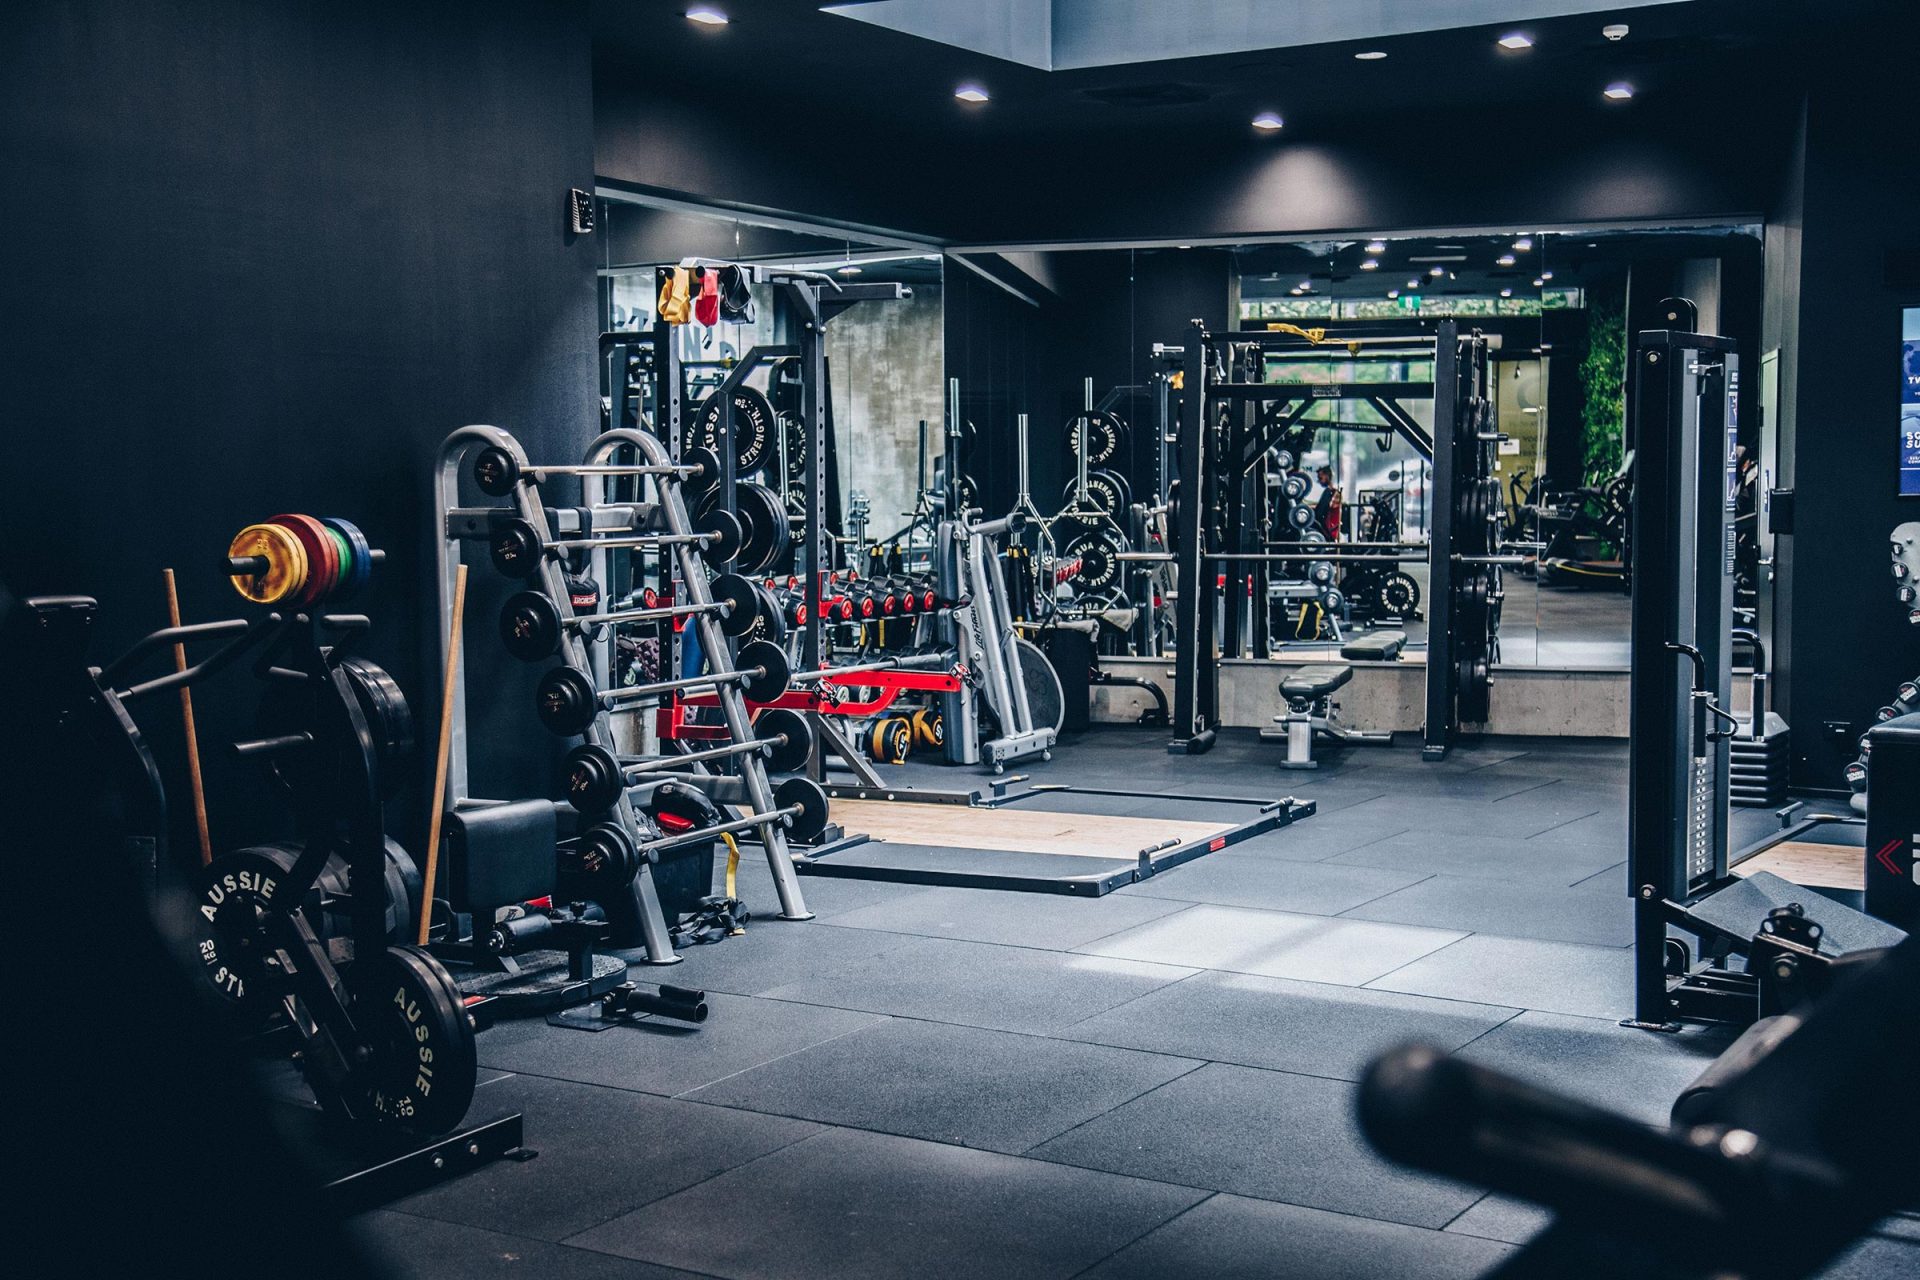 FTC gym photography by Squeeze Creative, Sydney, Surry Hills